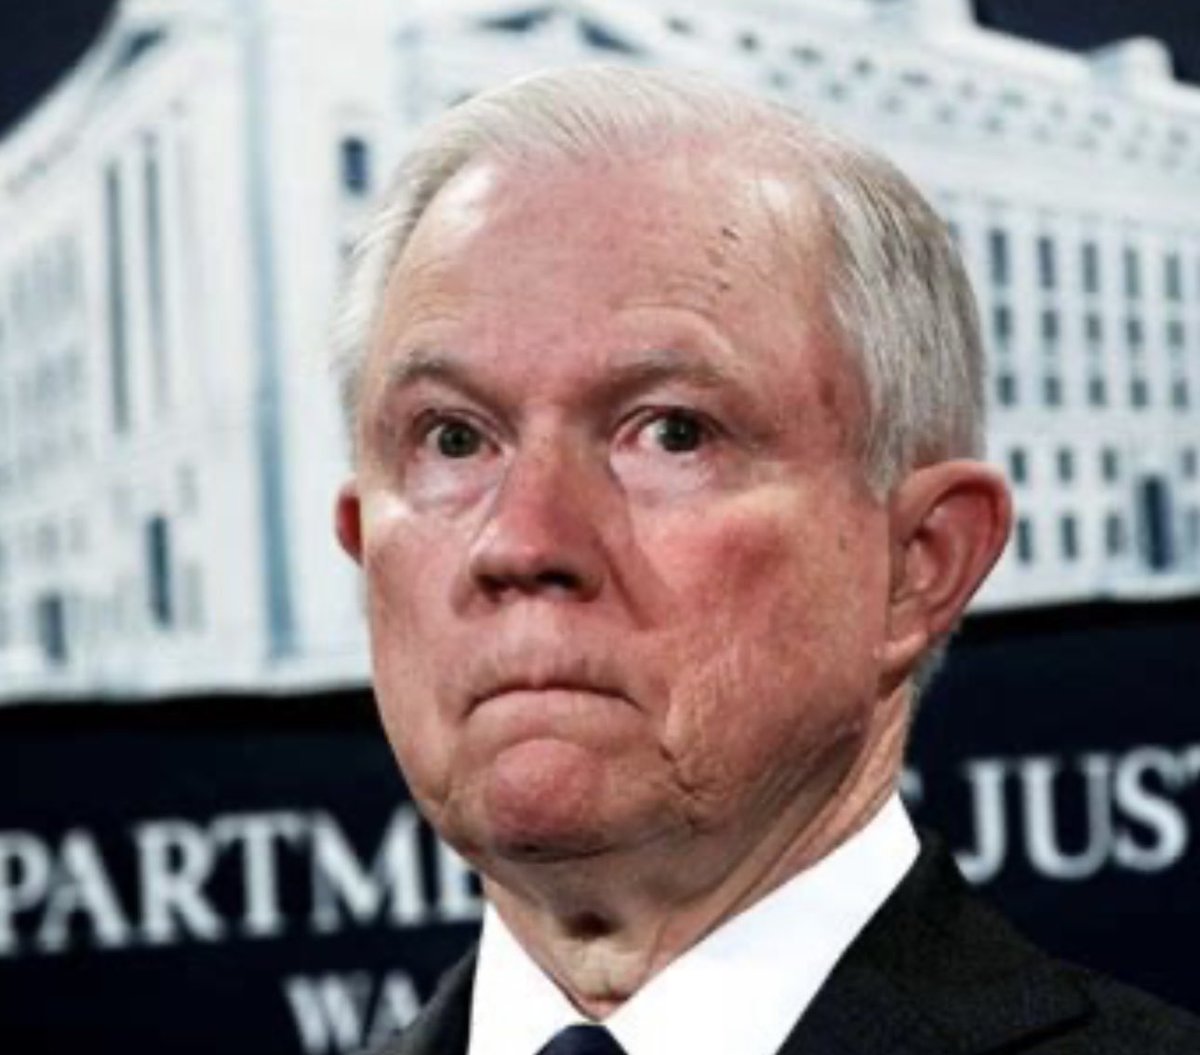 REMEMBER it was AG Jeff Sessions who stepped aside allowing Rob Rosenstein to appoint Robert Mueller to investigate the FAKE Russia hoax.

There’s been ZERO accountability for Sessions or Rob Rosenstein ! Why not ? Why has both their names been left out all this ? #conspiracy ? https://t.co/kznPnVmJL6